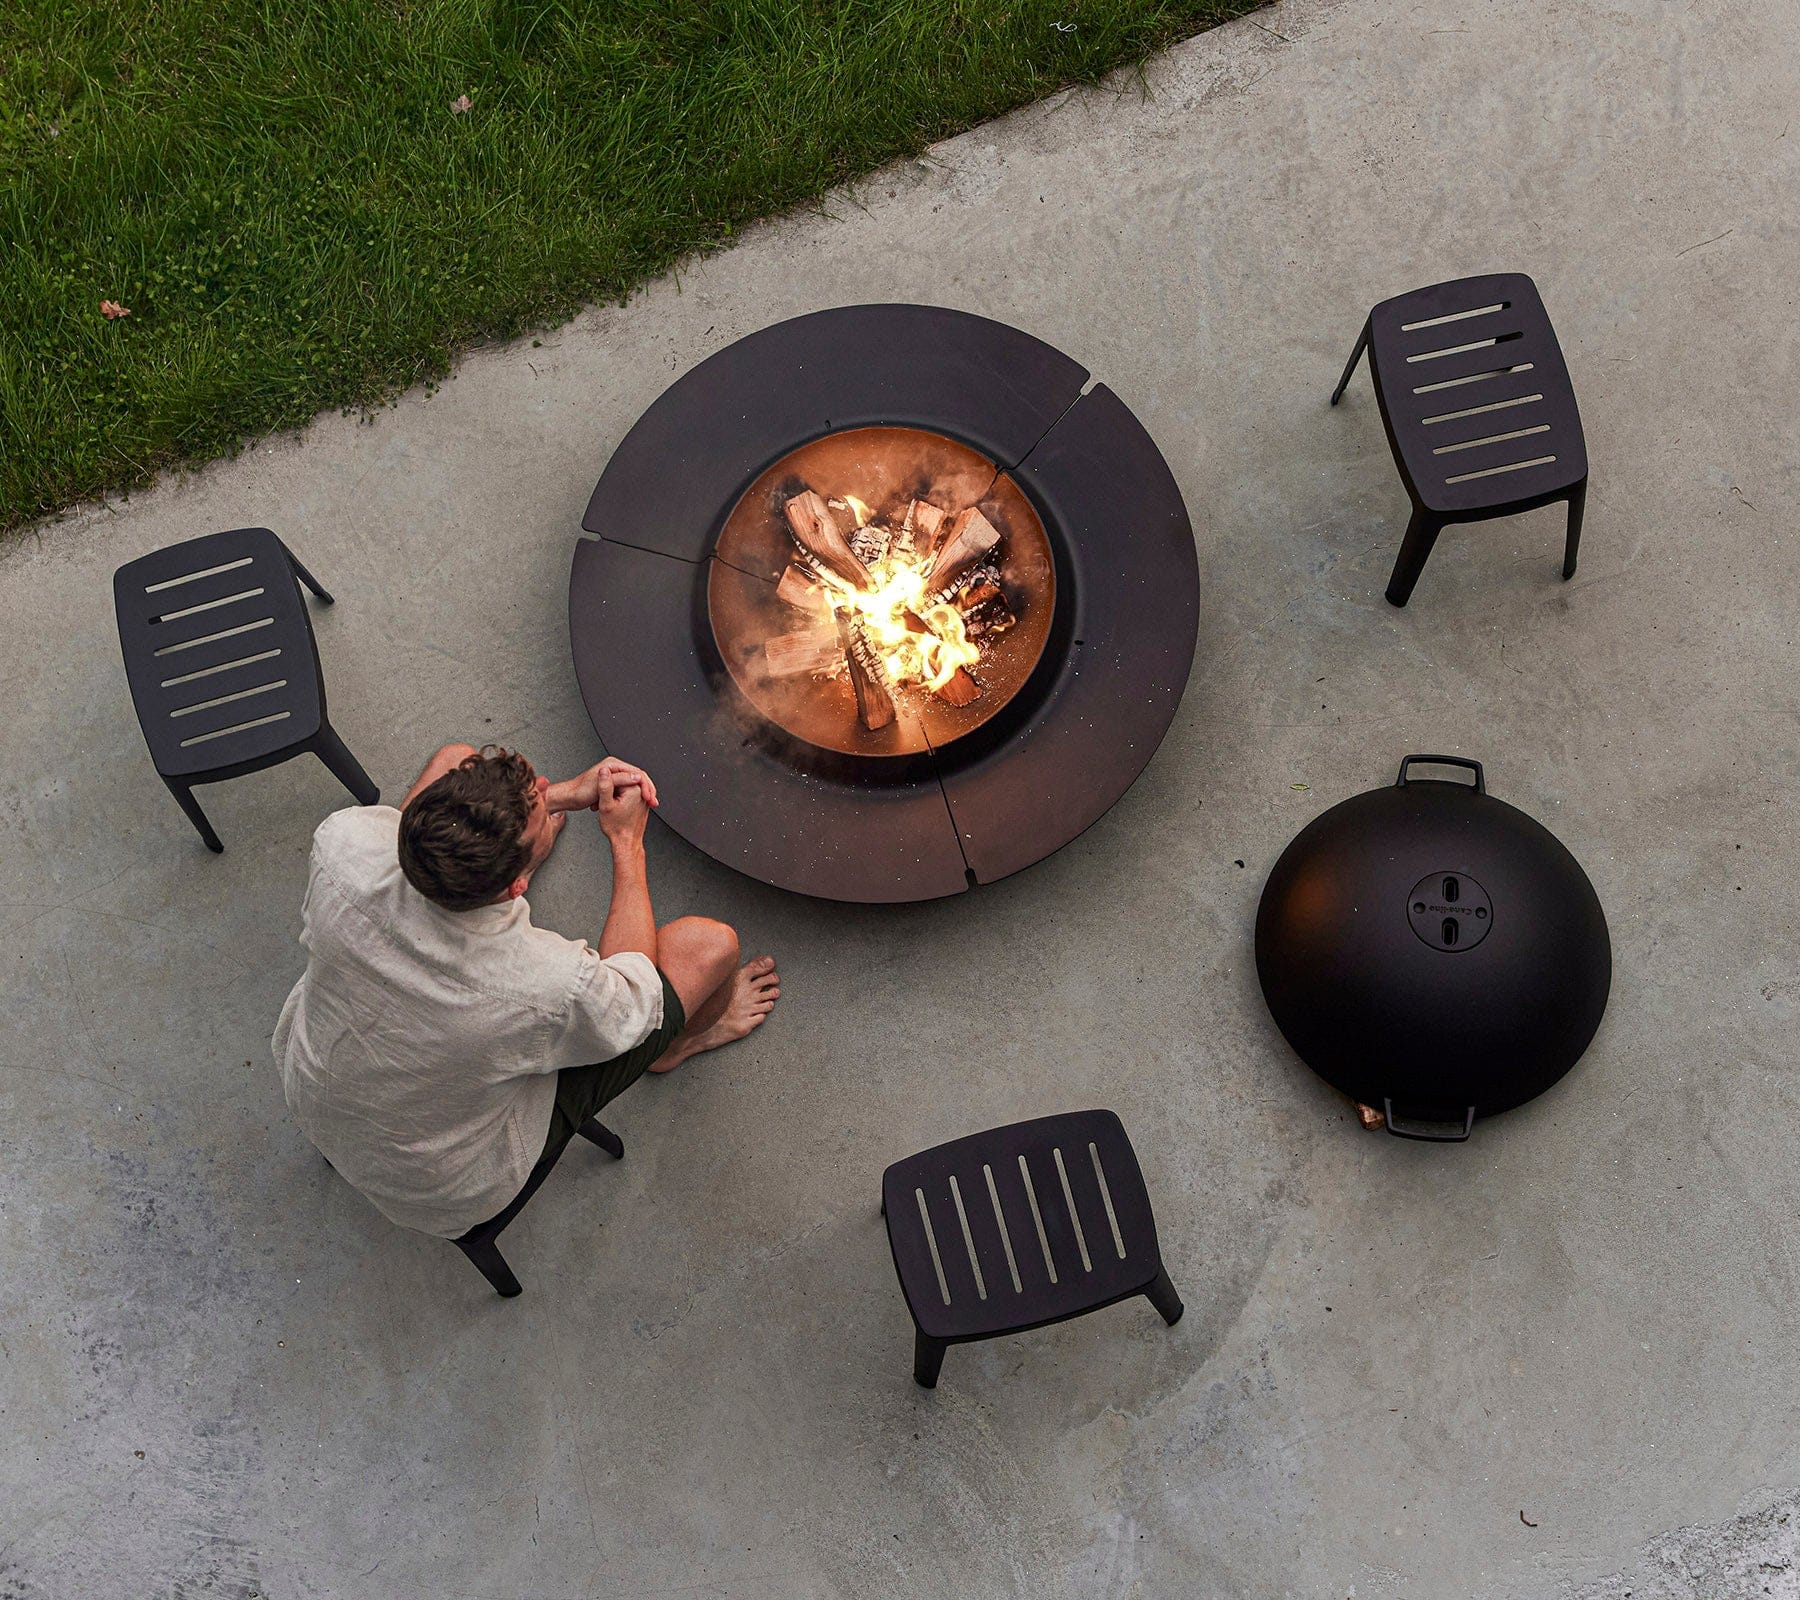 Boxhill's Cut High Outdoor Stool lifestyle image with a man sitting down and a fire pit in front, top view